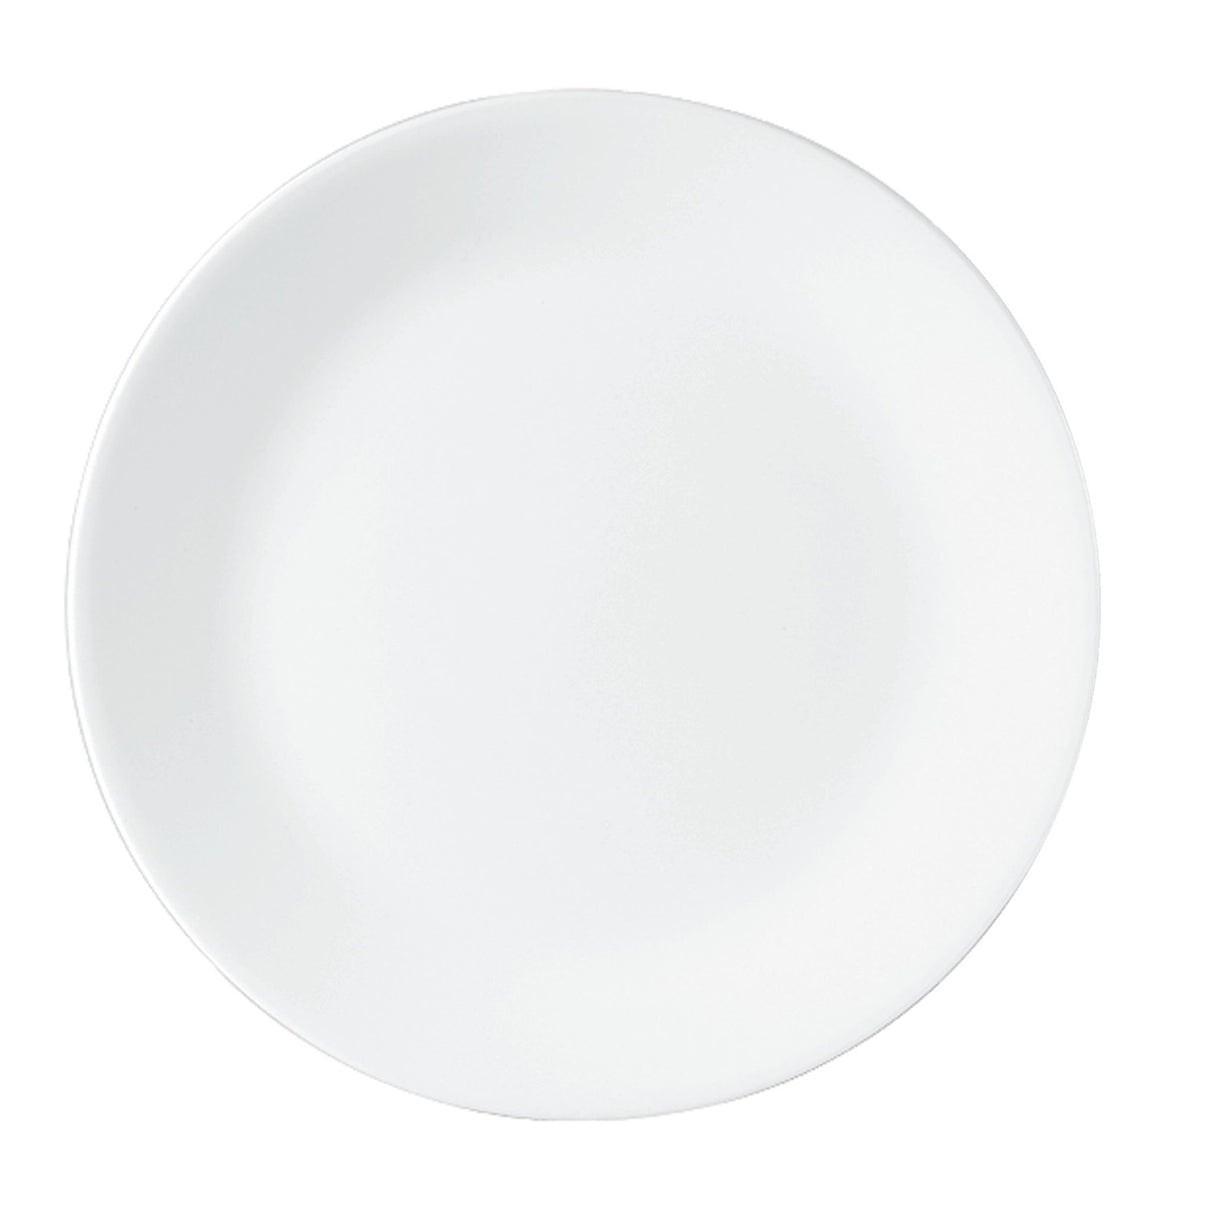  Winter Frost White 8.5" Salad Plate